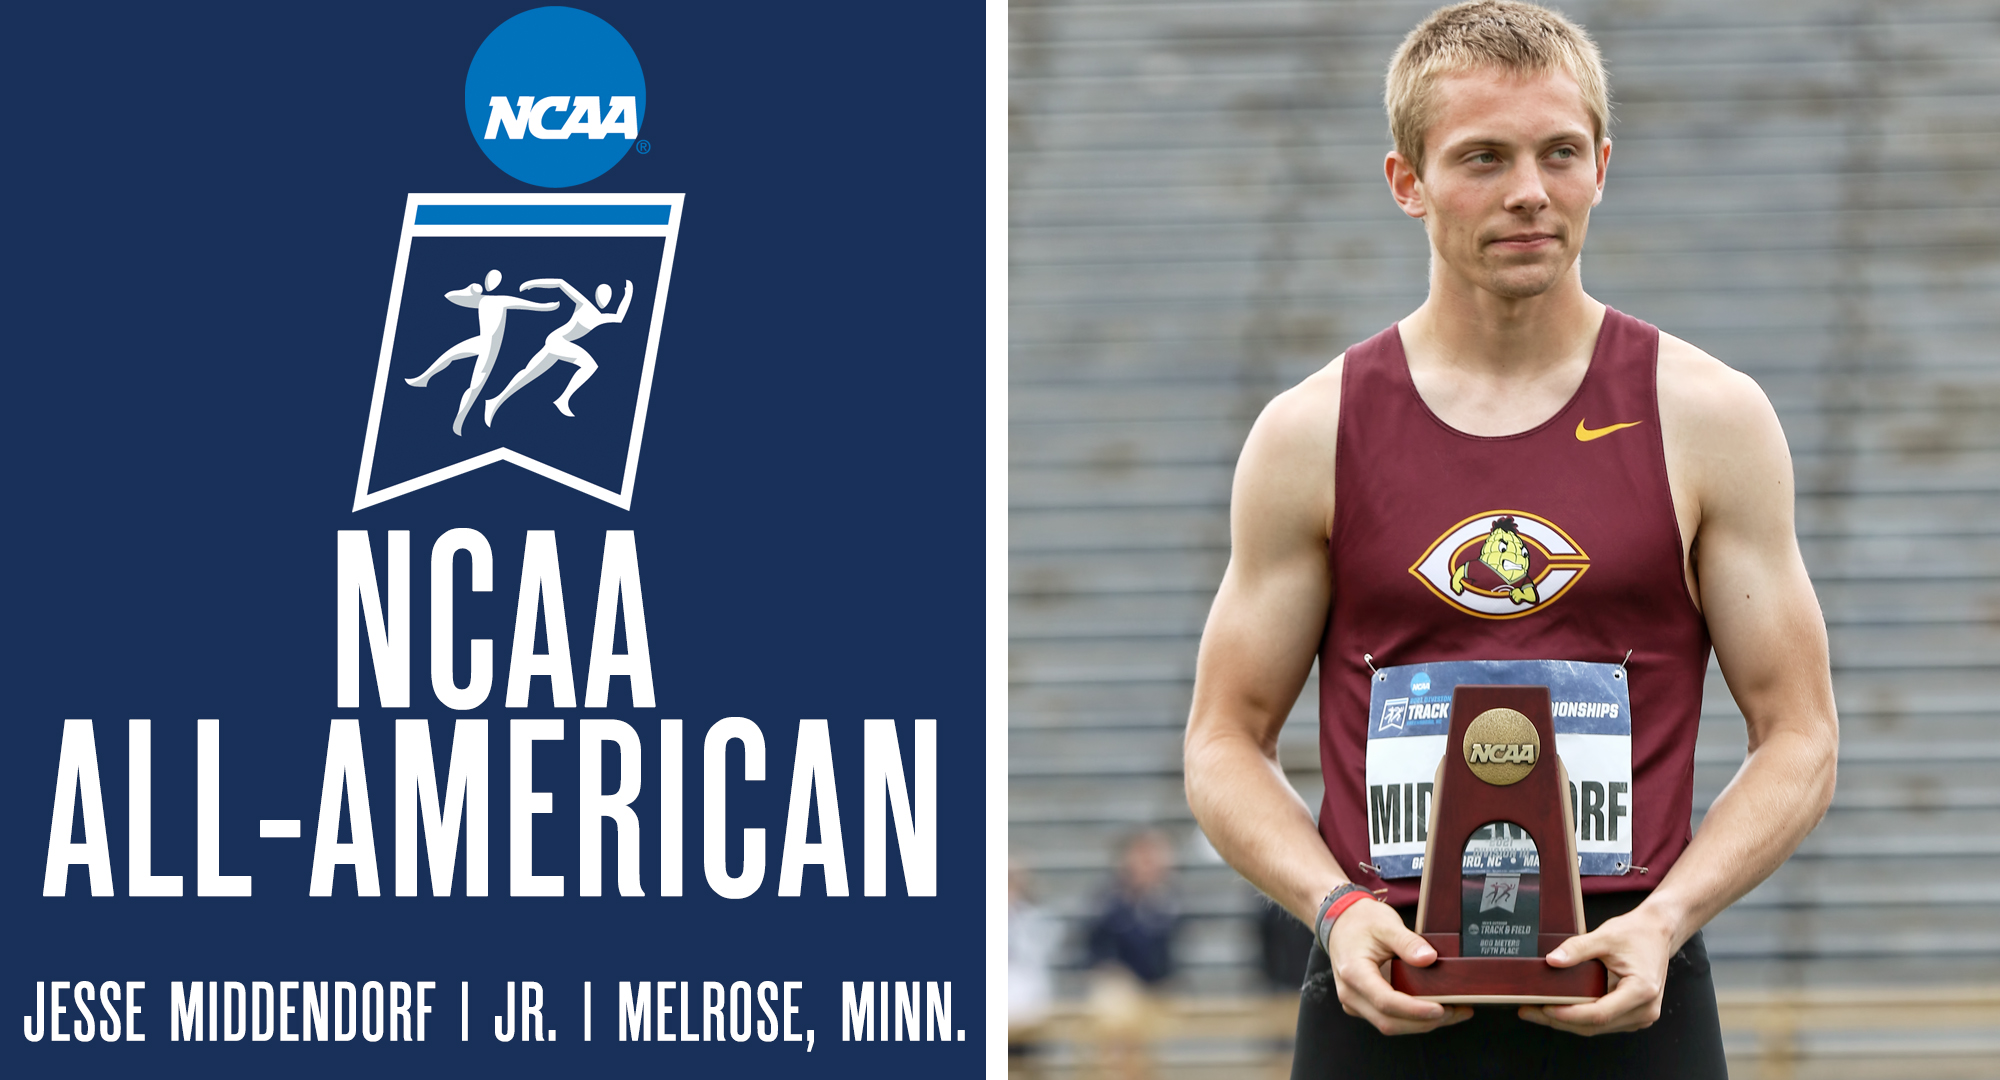 Junior Jesse Middendorf ran a 1:52.53 in the finals of the 800 meters and finished fifth to become the first Cobber All-American track athlete since 1992.